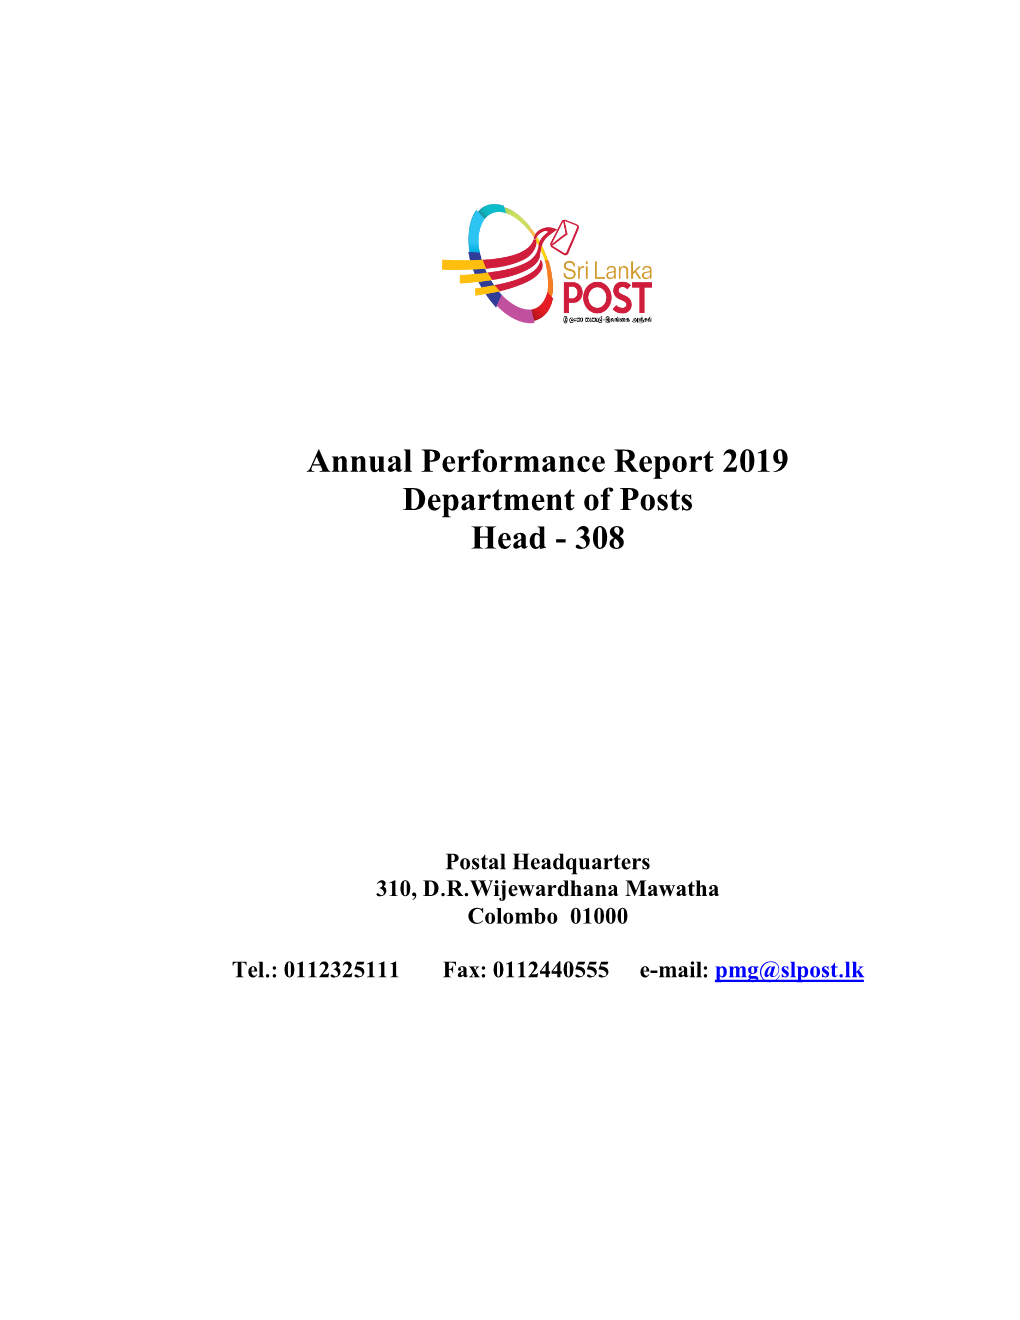 Annual Performance Report 2019 Department of Posts Head - 308